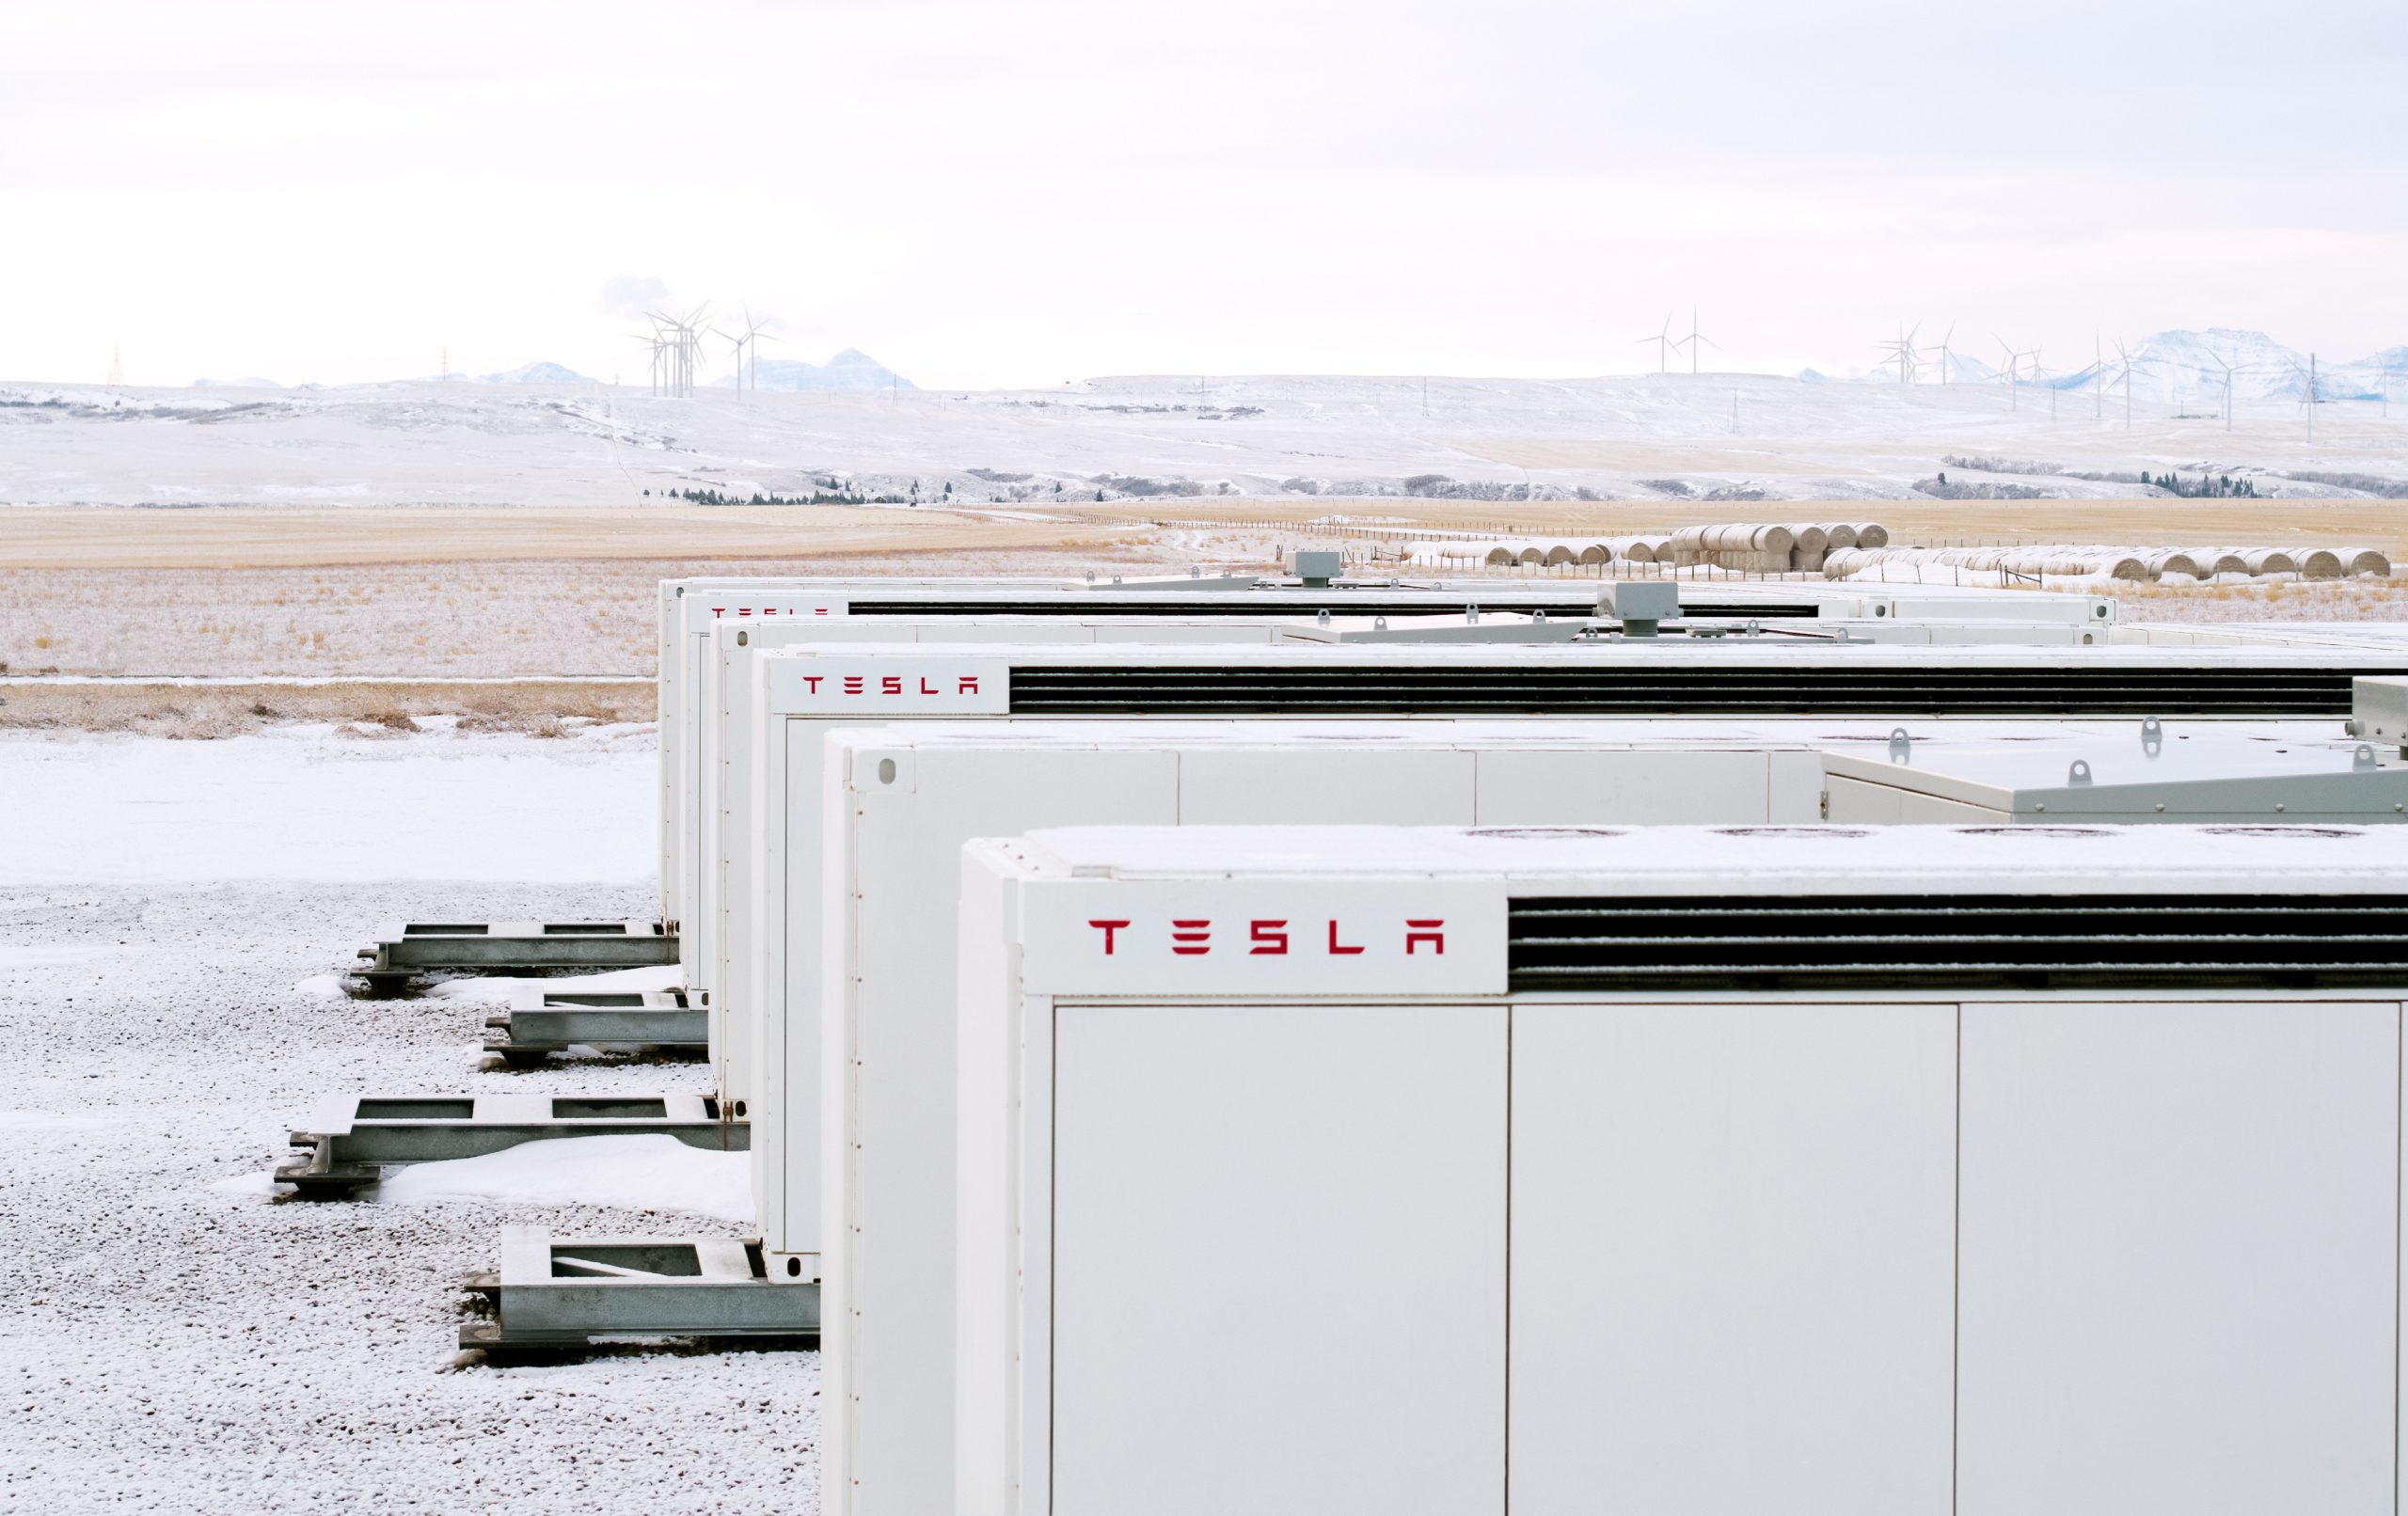 These States That Have the Most Battery Storage